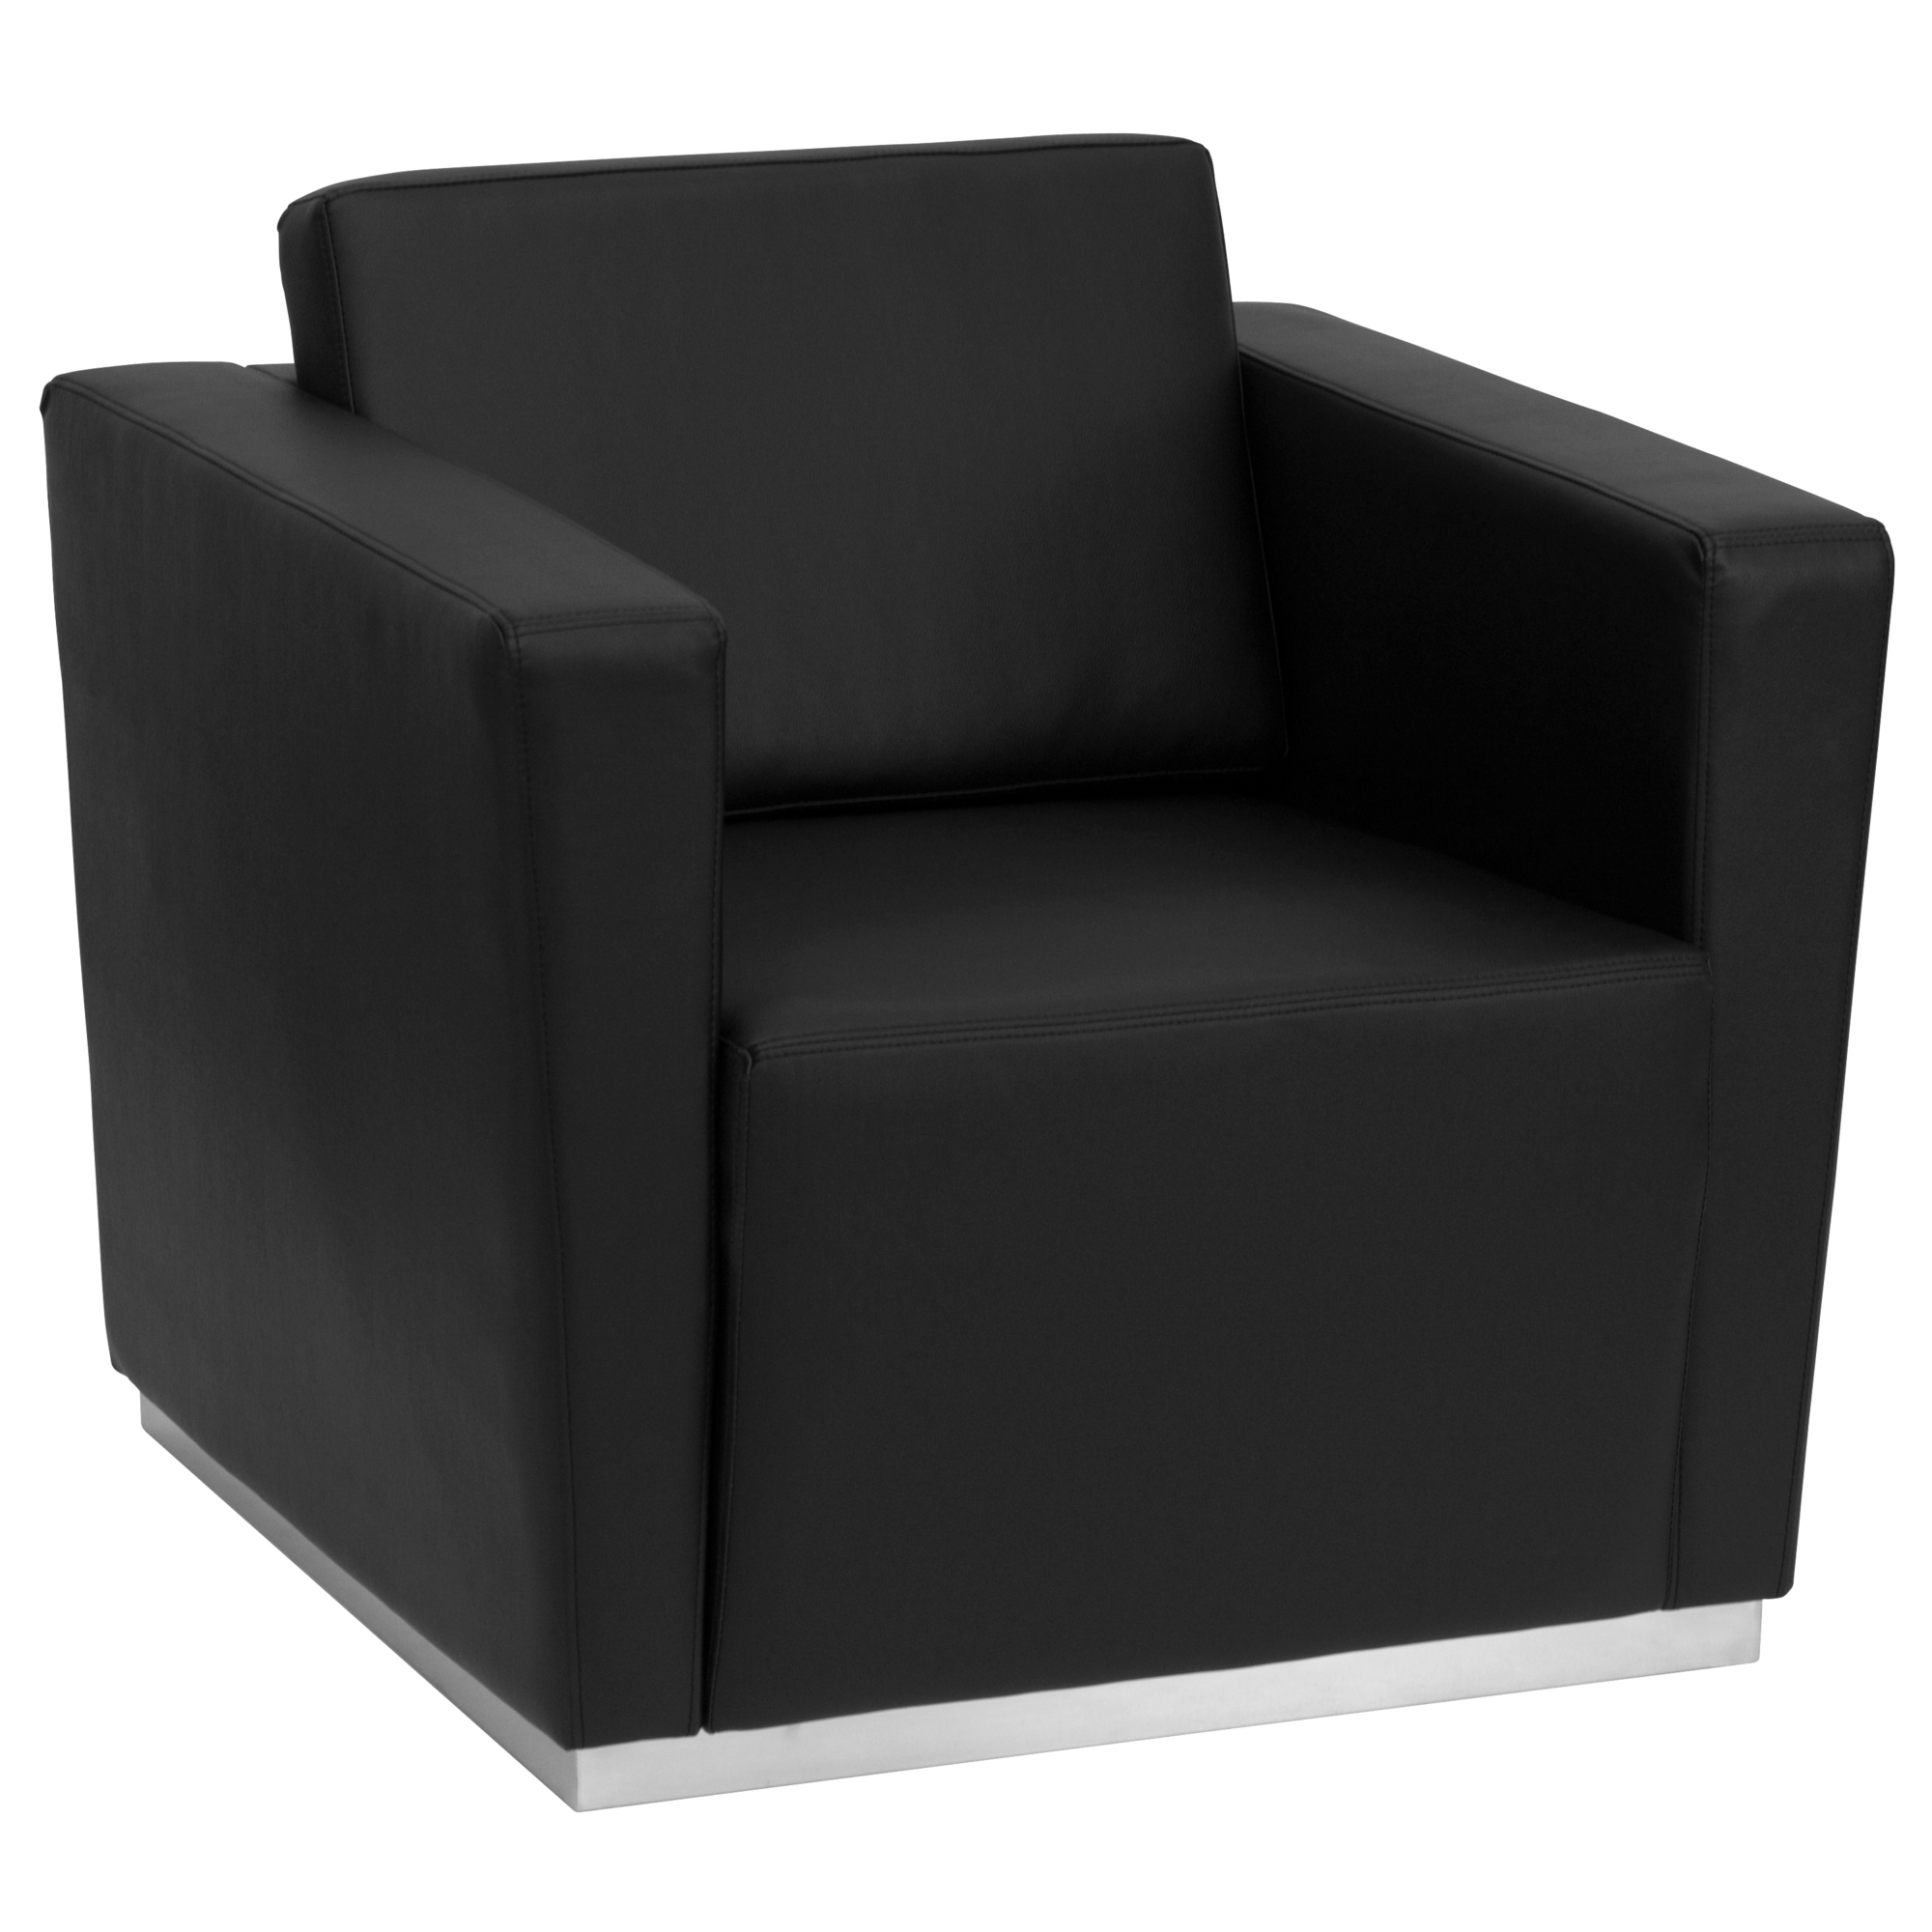 Flash Furniture, Black LeatherSoft Chair with Stainless Steel Base, Primary Color Black, Included (qty.) 1, Model ZBSTRIN8094CHBK